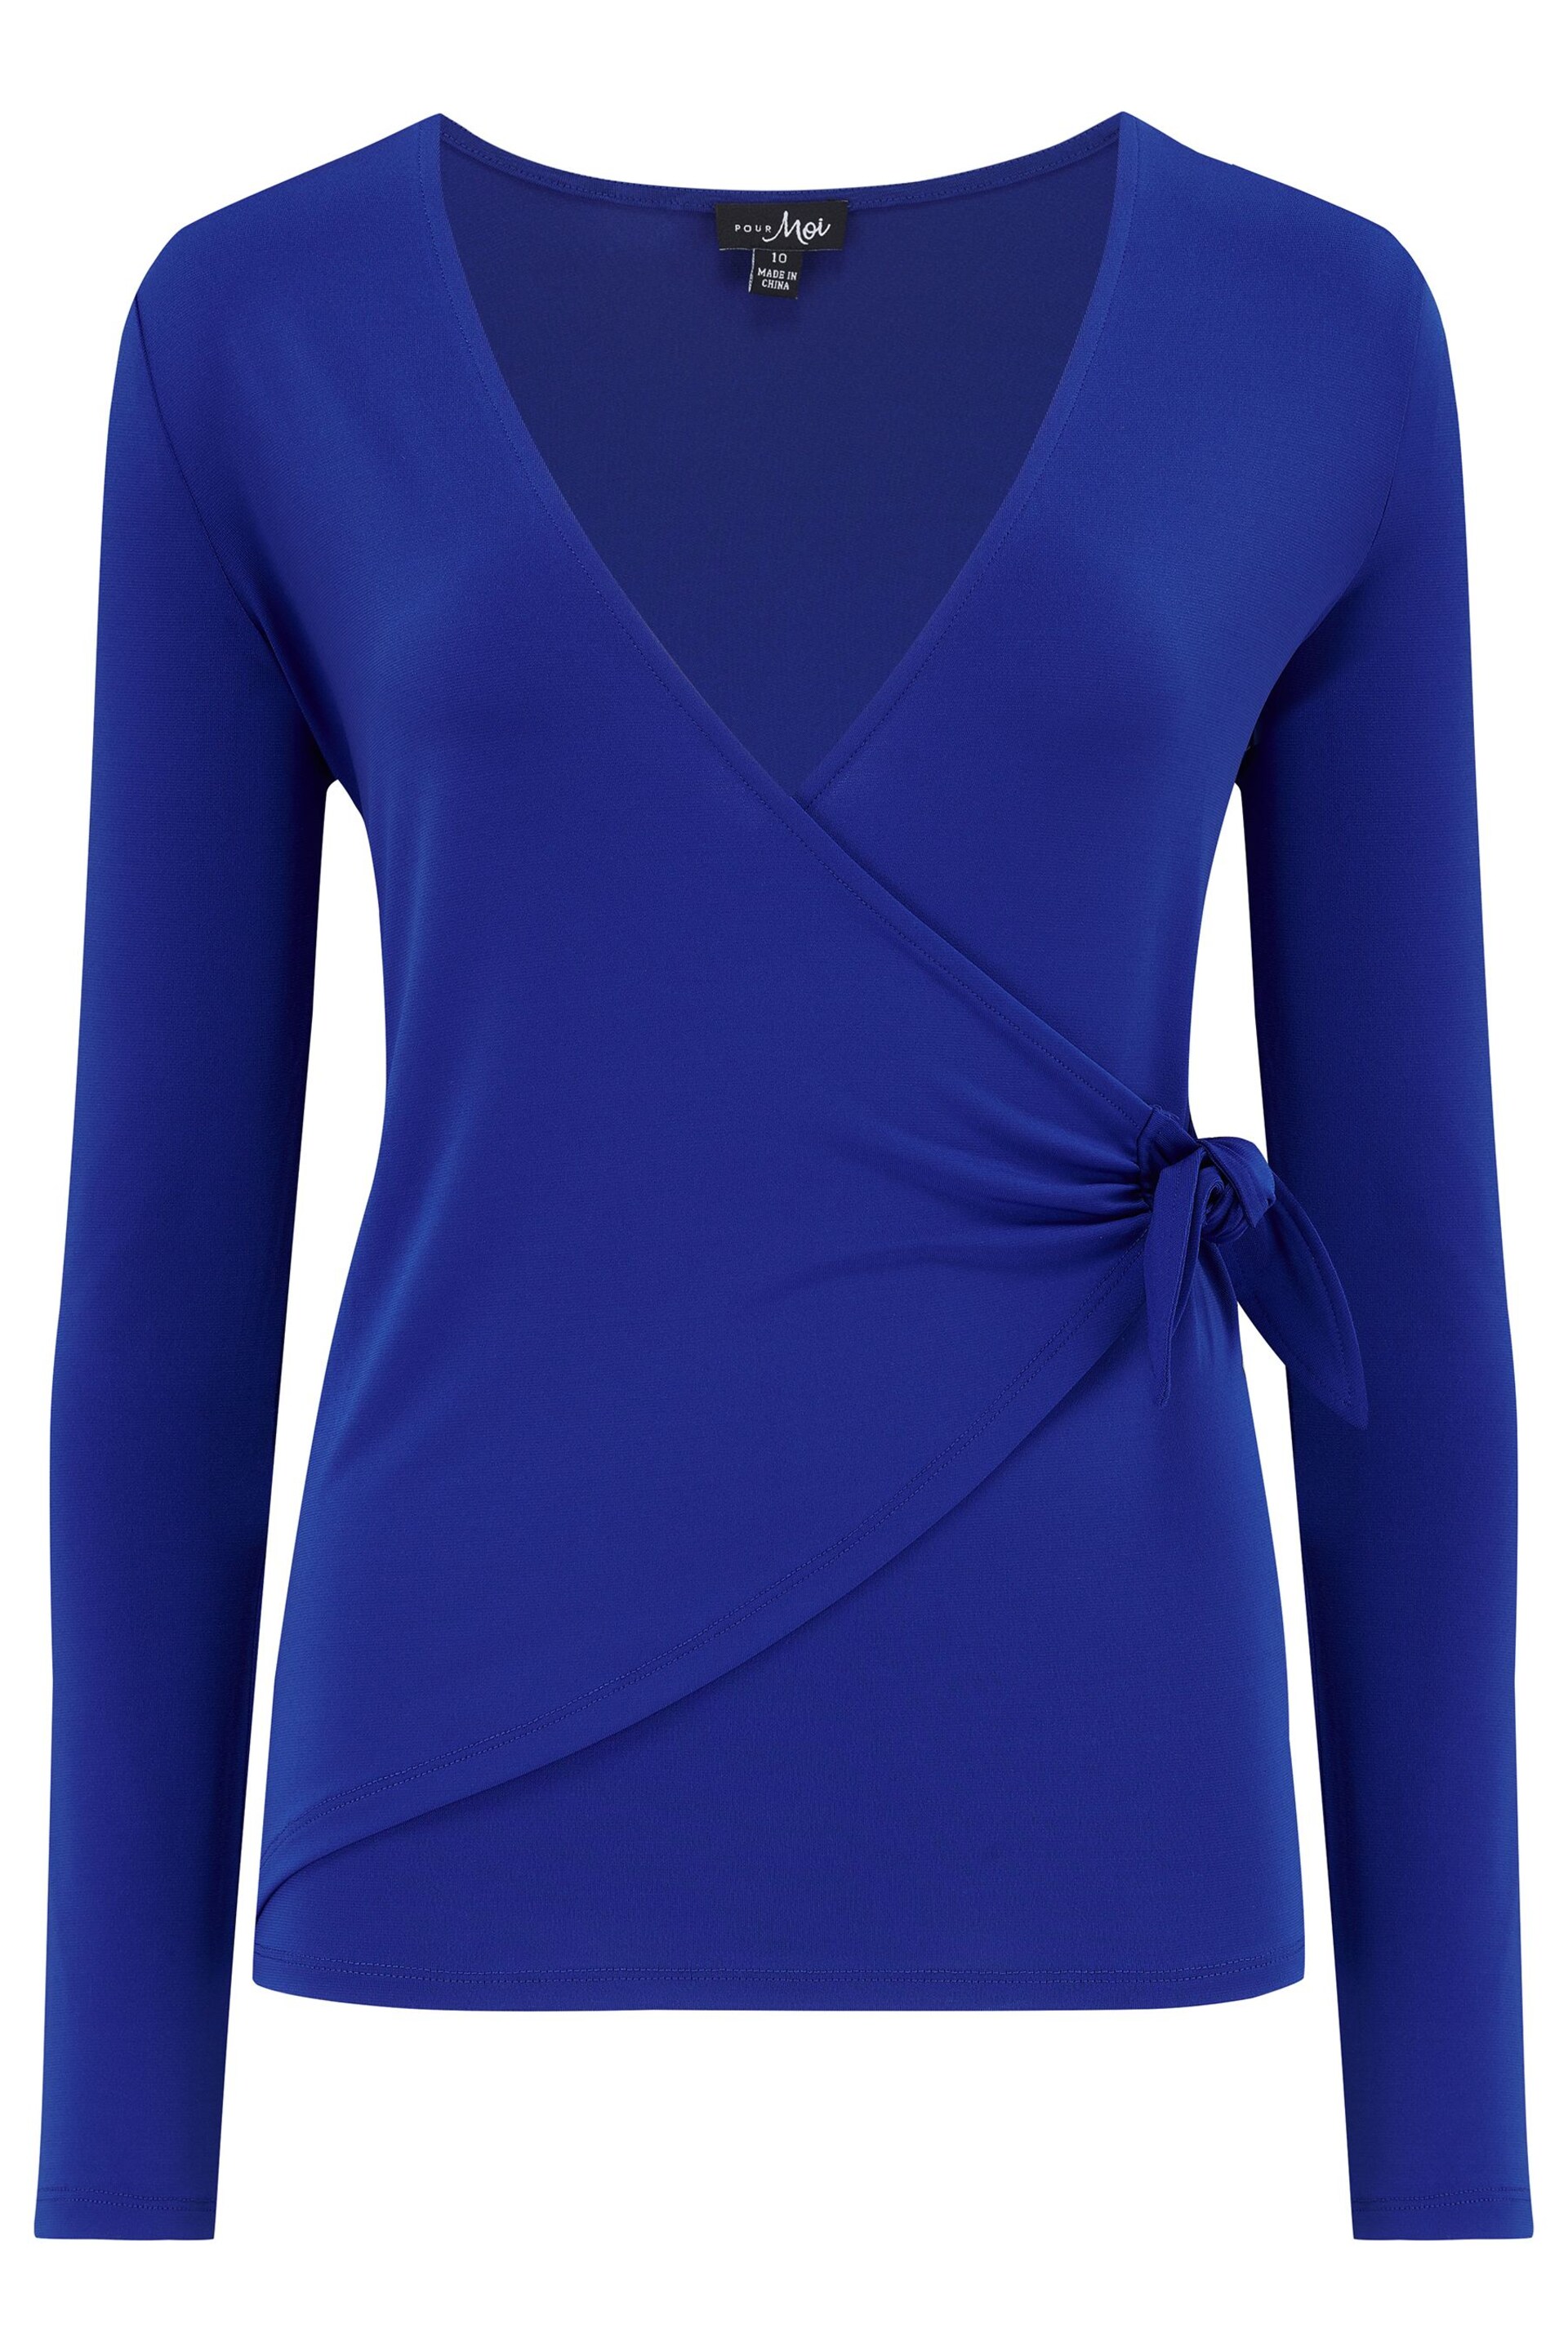 Pour Moi Blue Bryony Slinky Blouse - Image 4 of 5